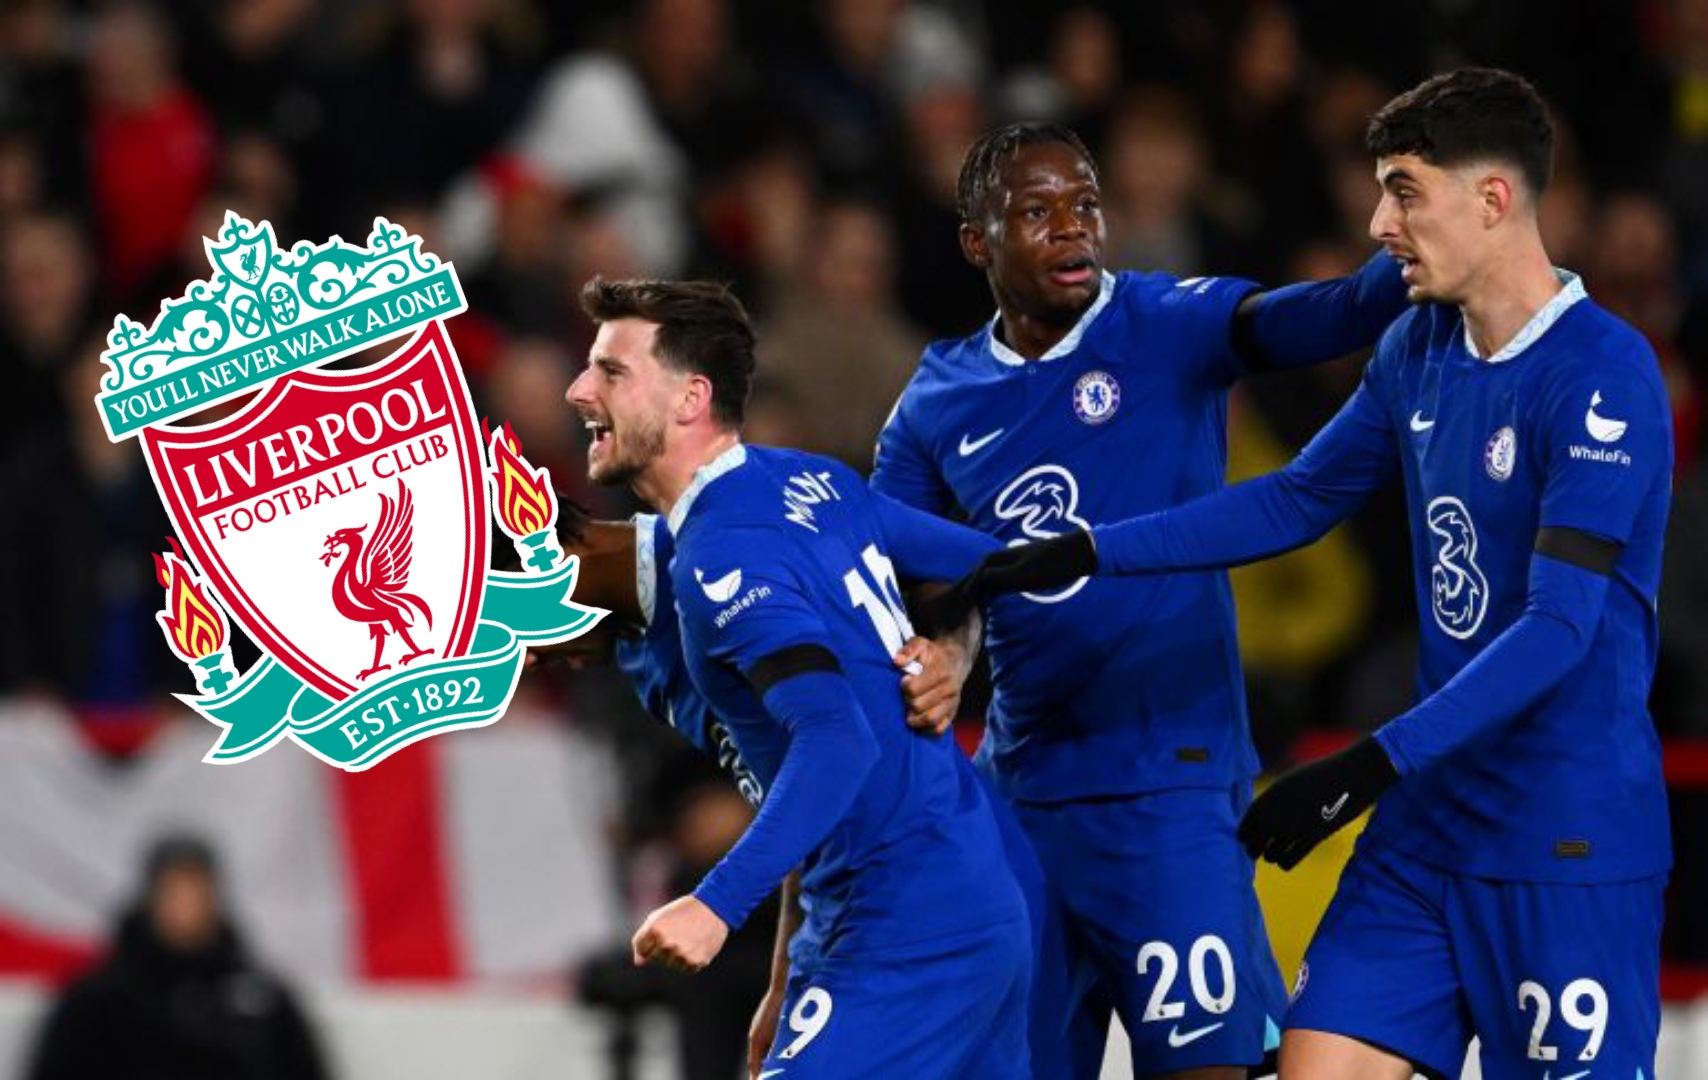 Liverpool ‘in direct contact’ with Chelsea midfielder as contract talks stall again 1 Sportelo